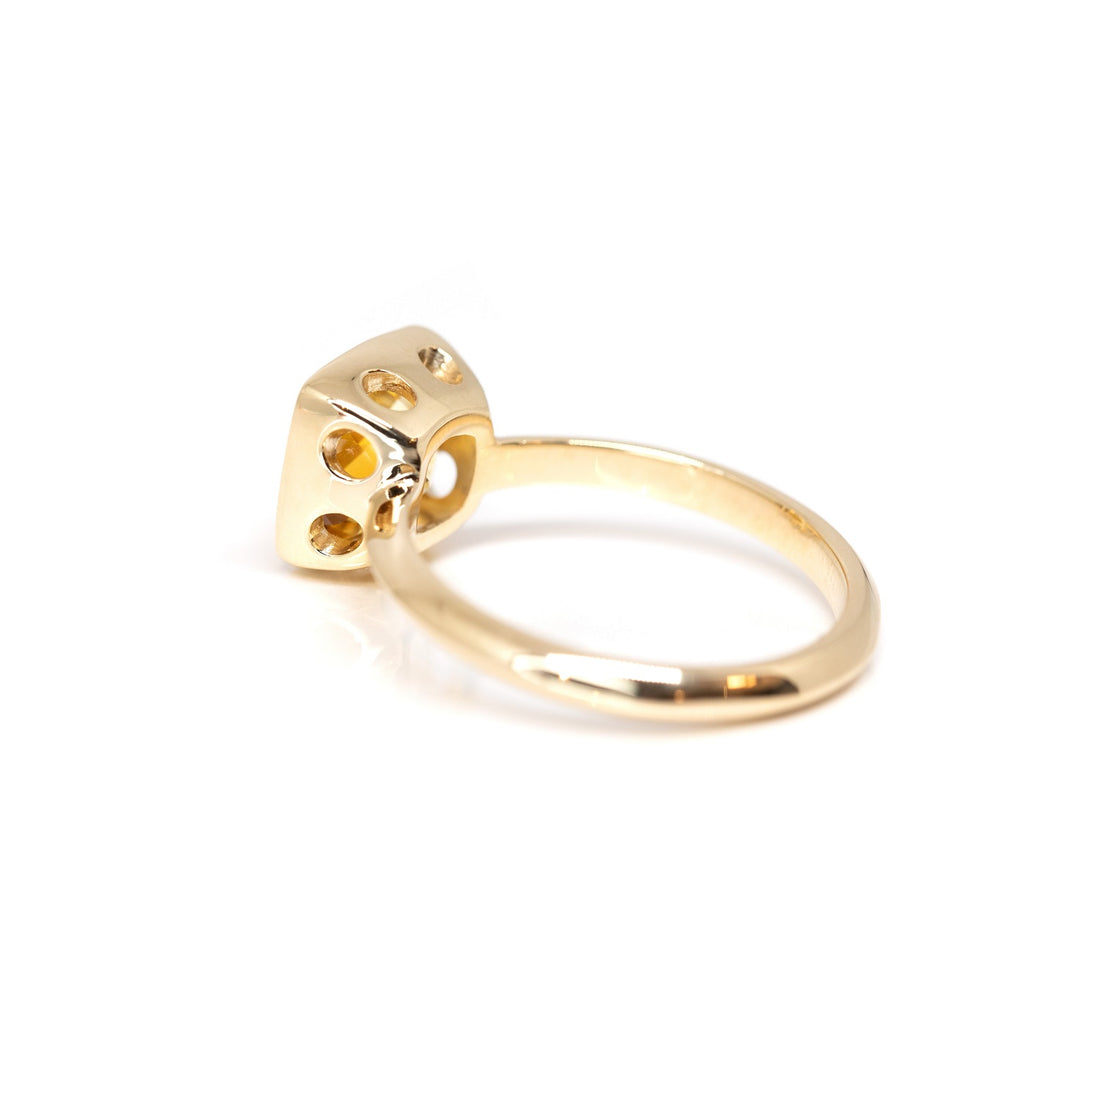 back view of statement yellow gold bena jewelry ring made in montreal on a white background